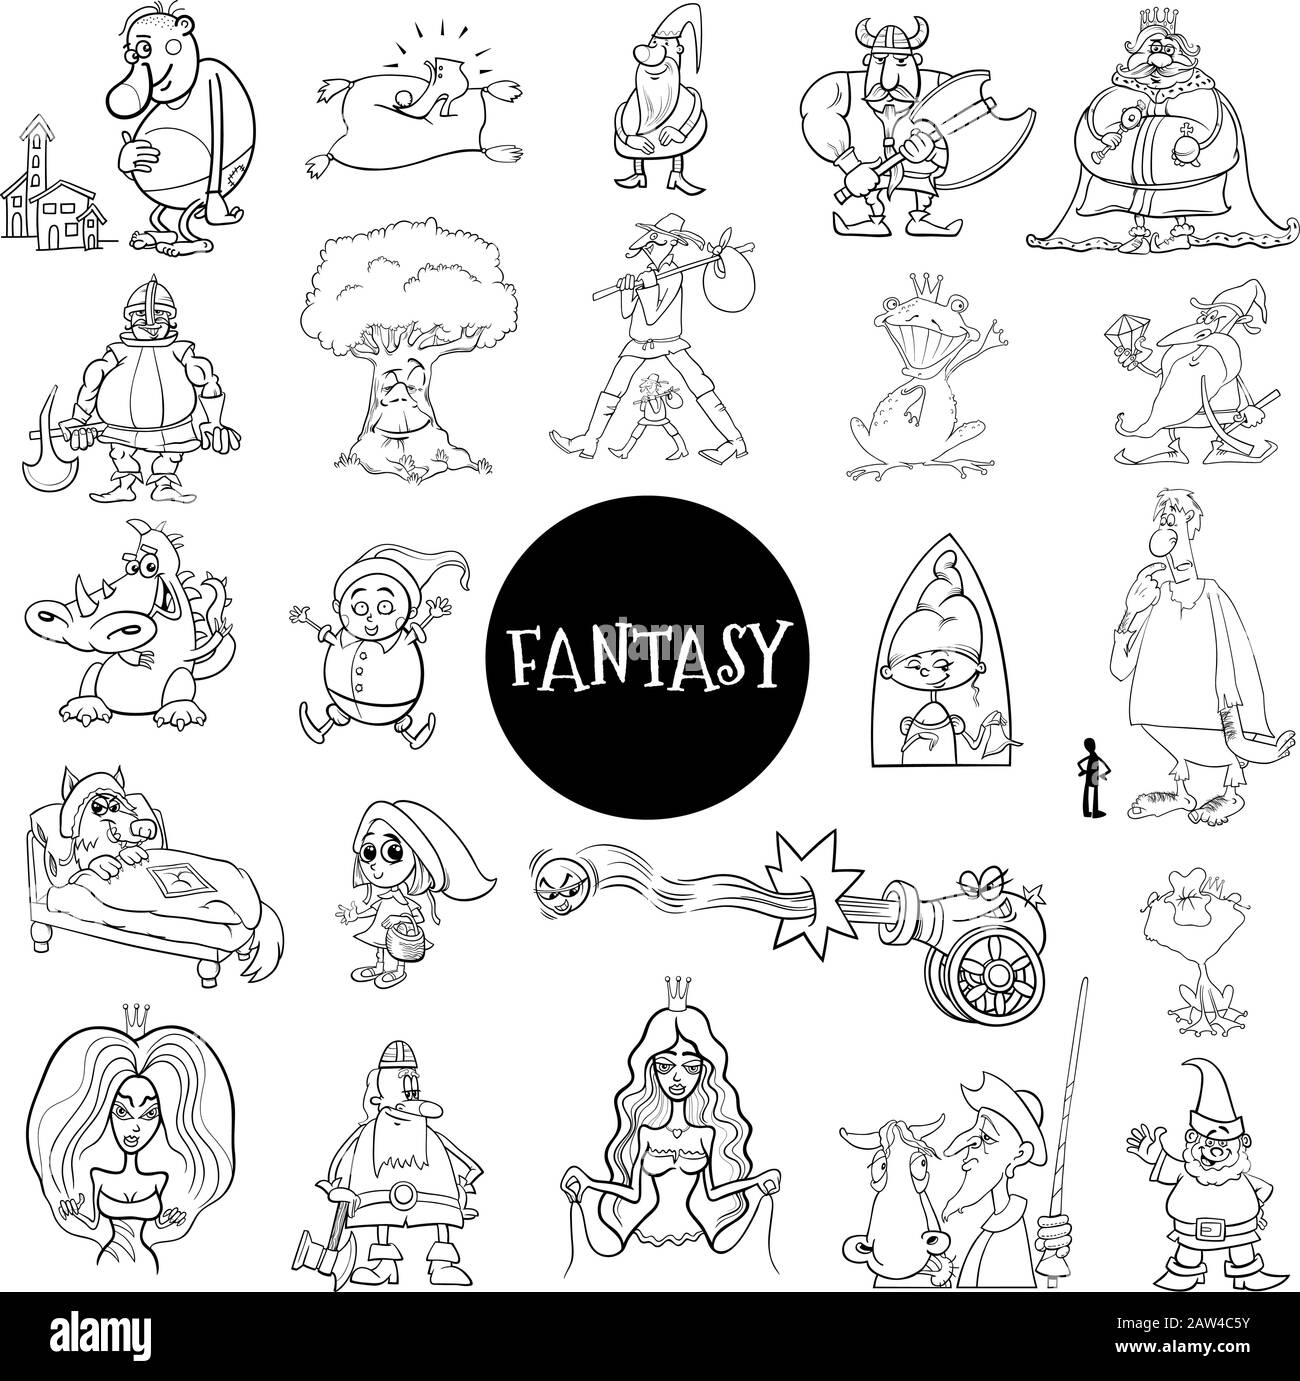 Black And White Cartoon Illustration Of Fantasy Or Fairy Tale Characters Large Set Coloring Book Page Illustration de Vecteur